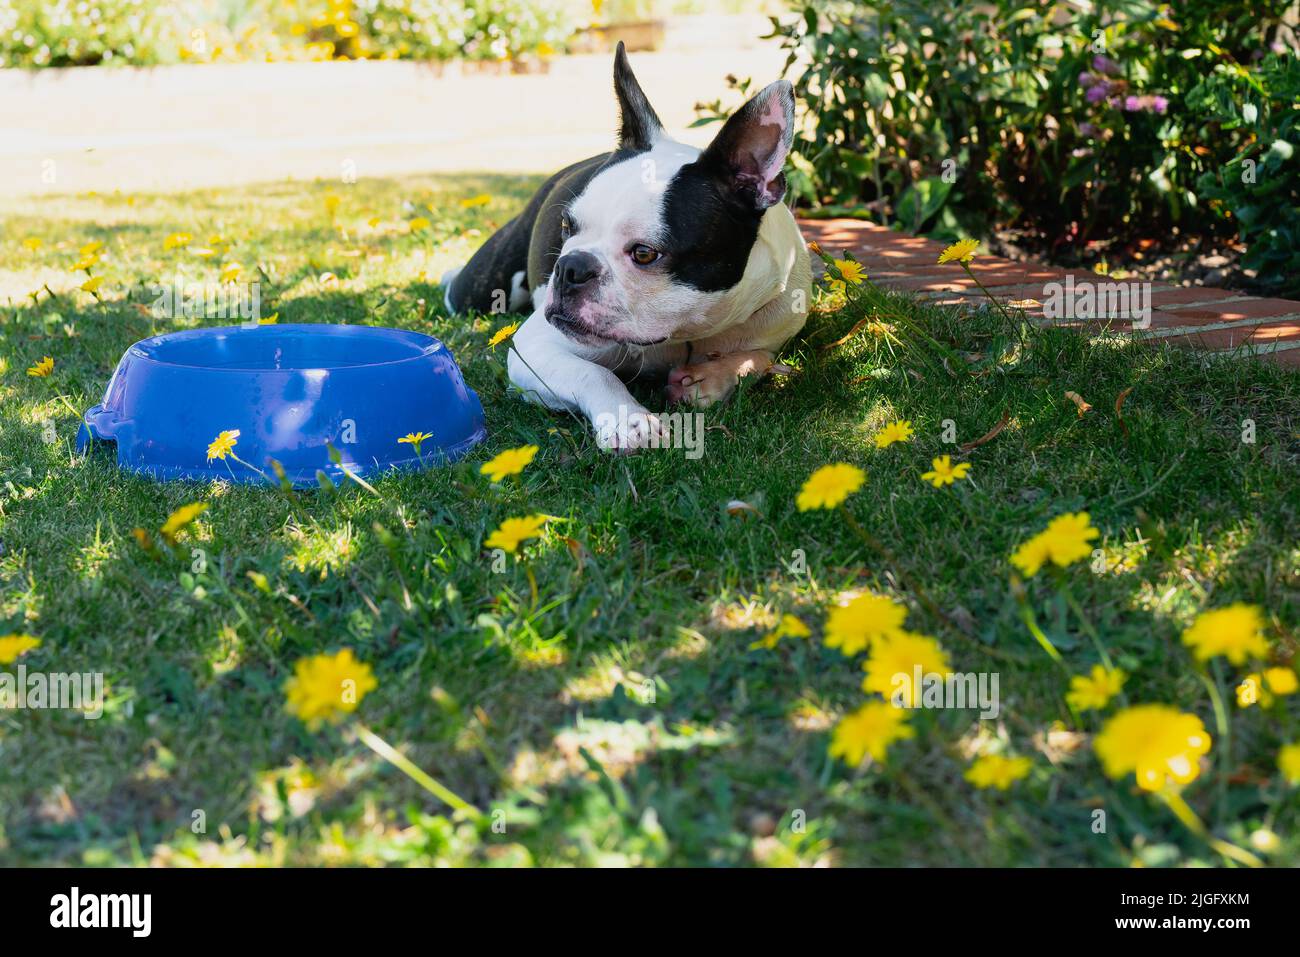 Boston Terrier dog lying down on grass with danelions, next to a water bowl. The dog is lying in the shade on a hot day. Stock Photo